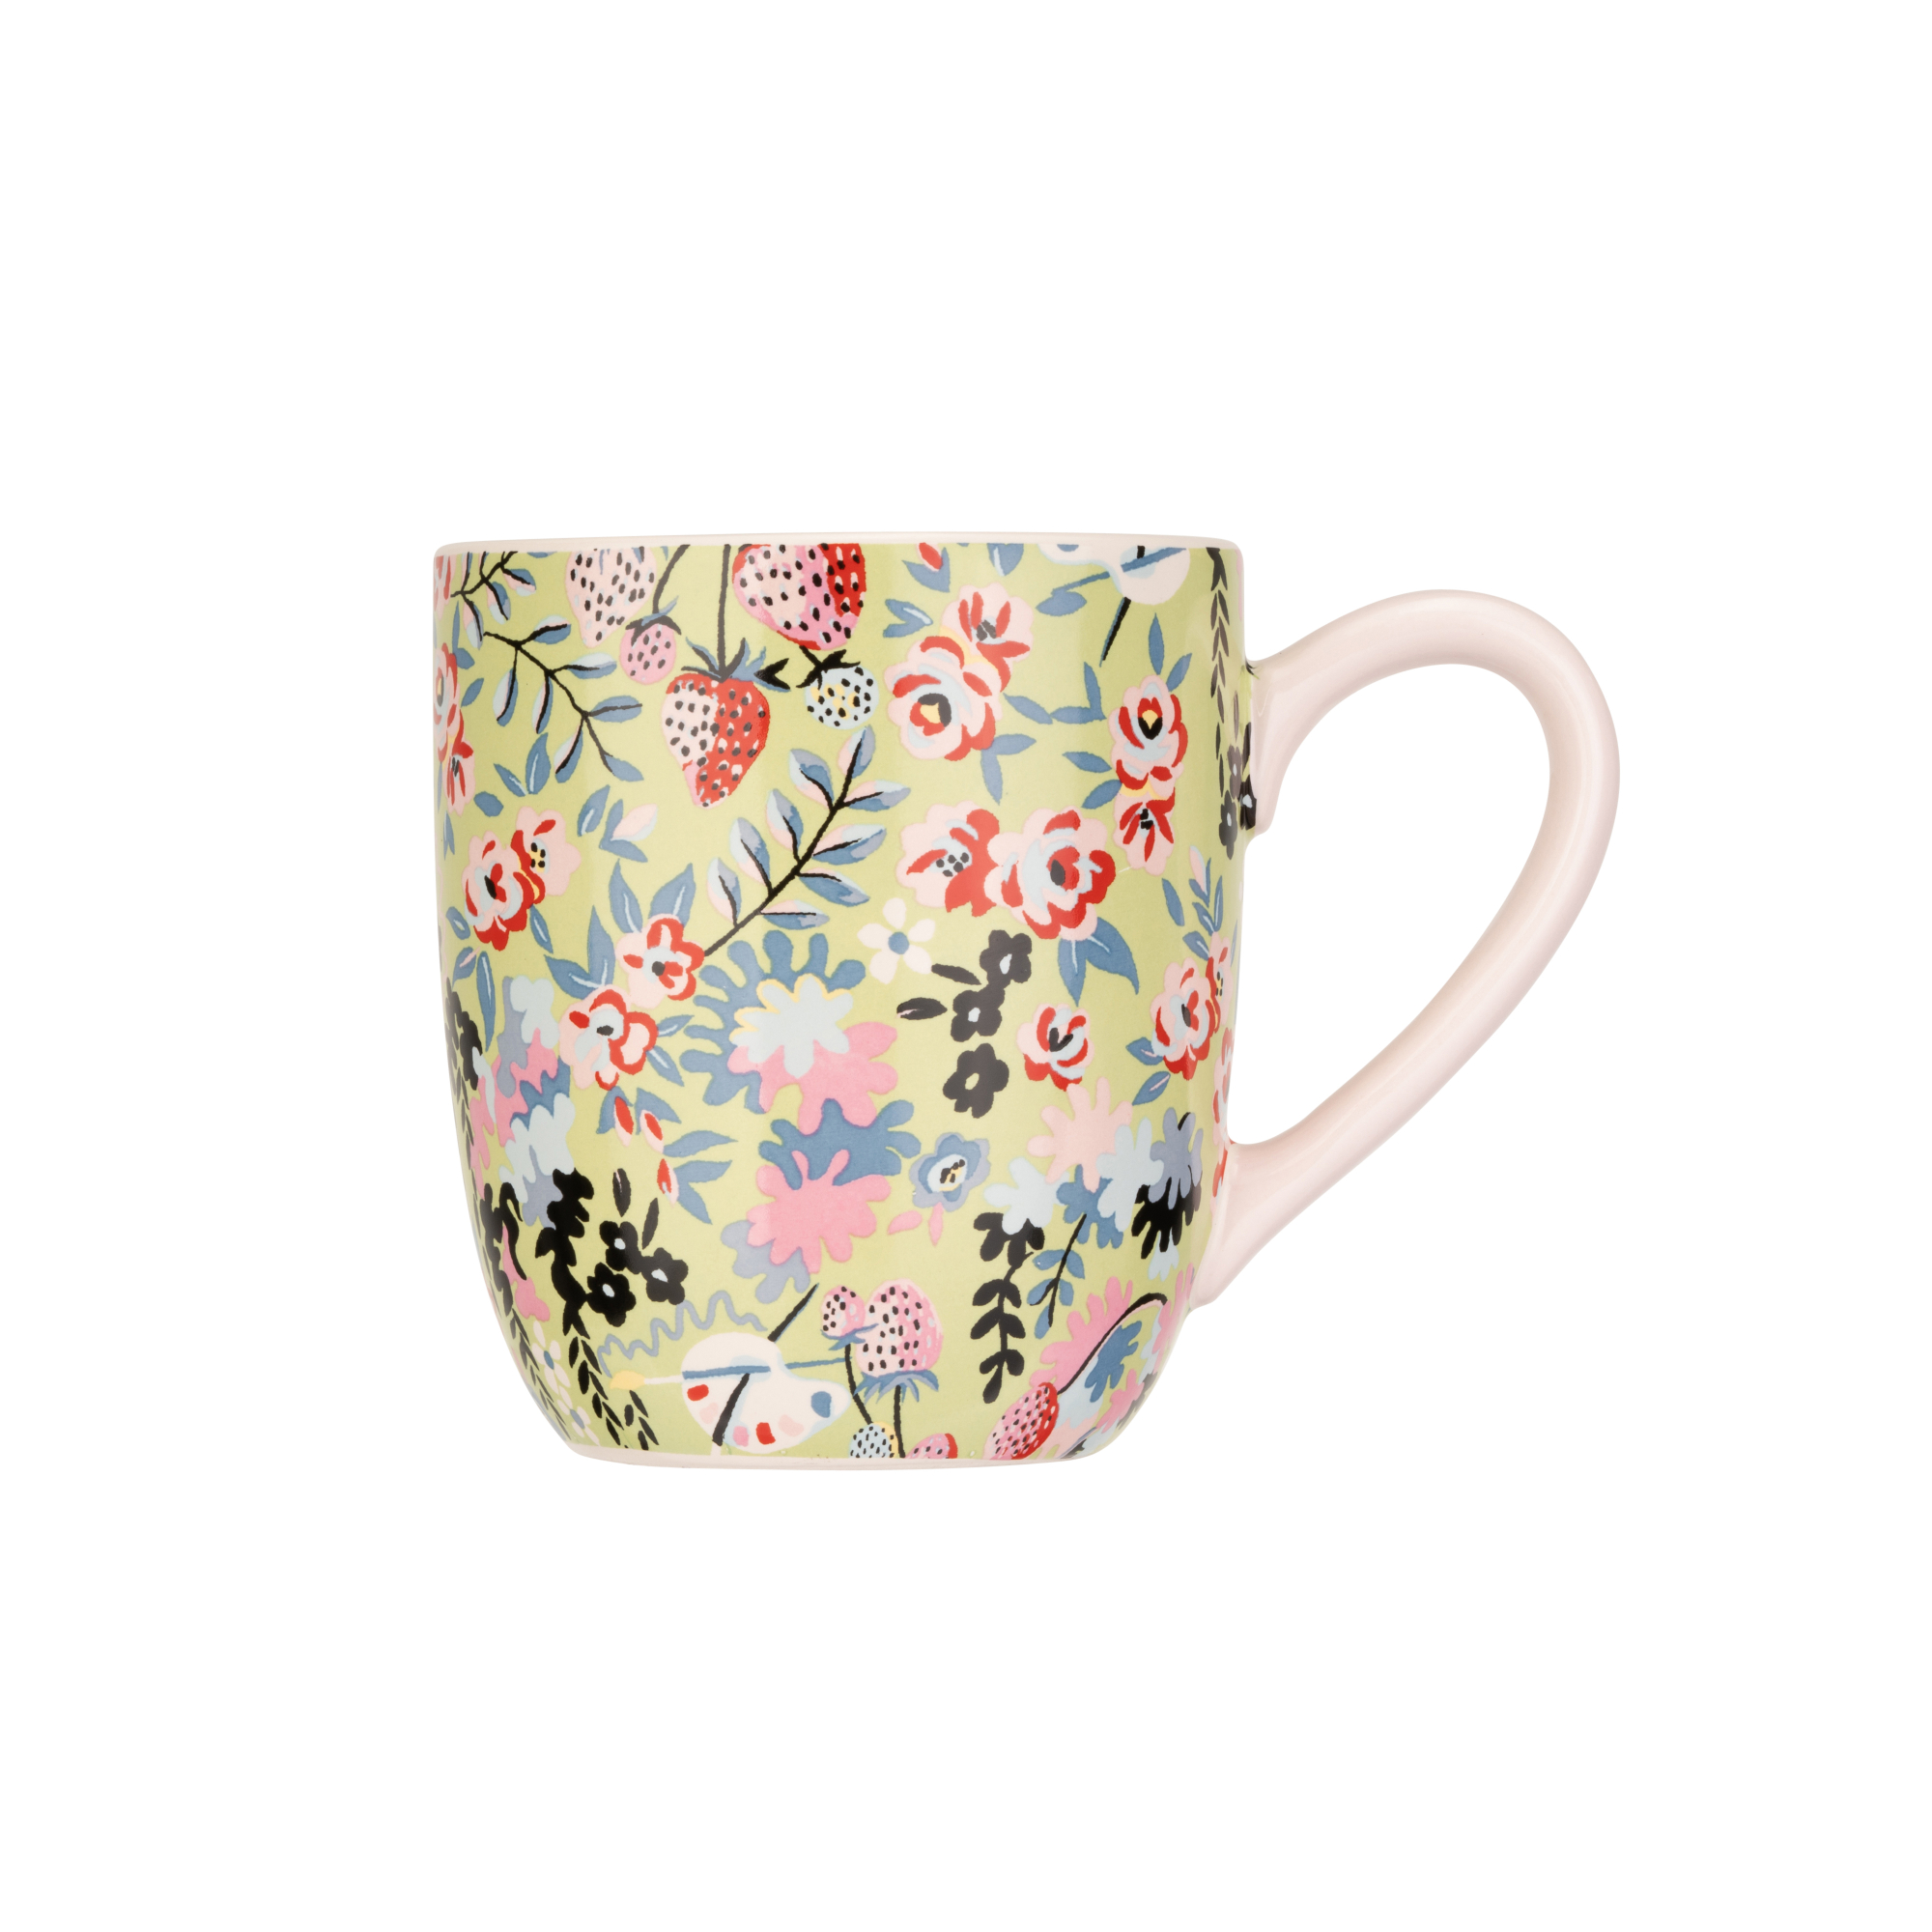 Cath Kidston Painted Table Green Ditsy Floral Breakfast Mug